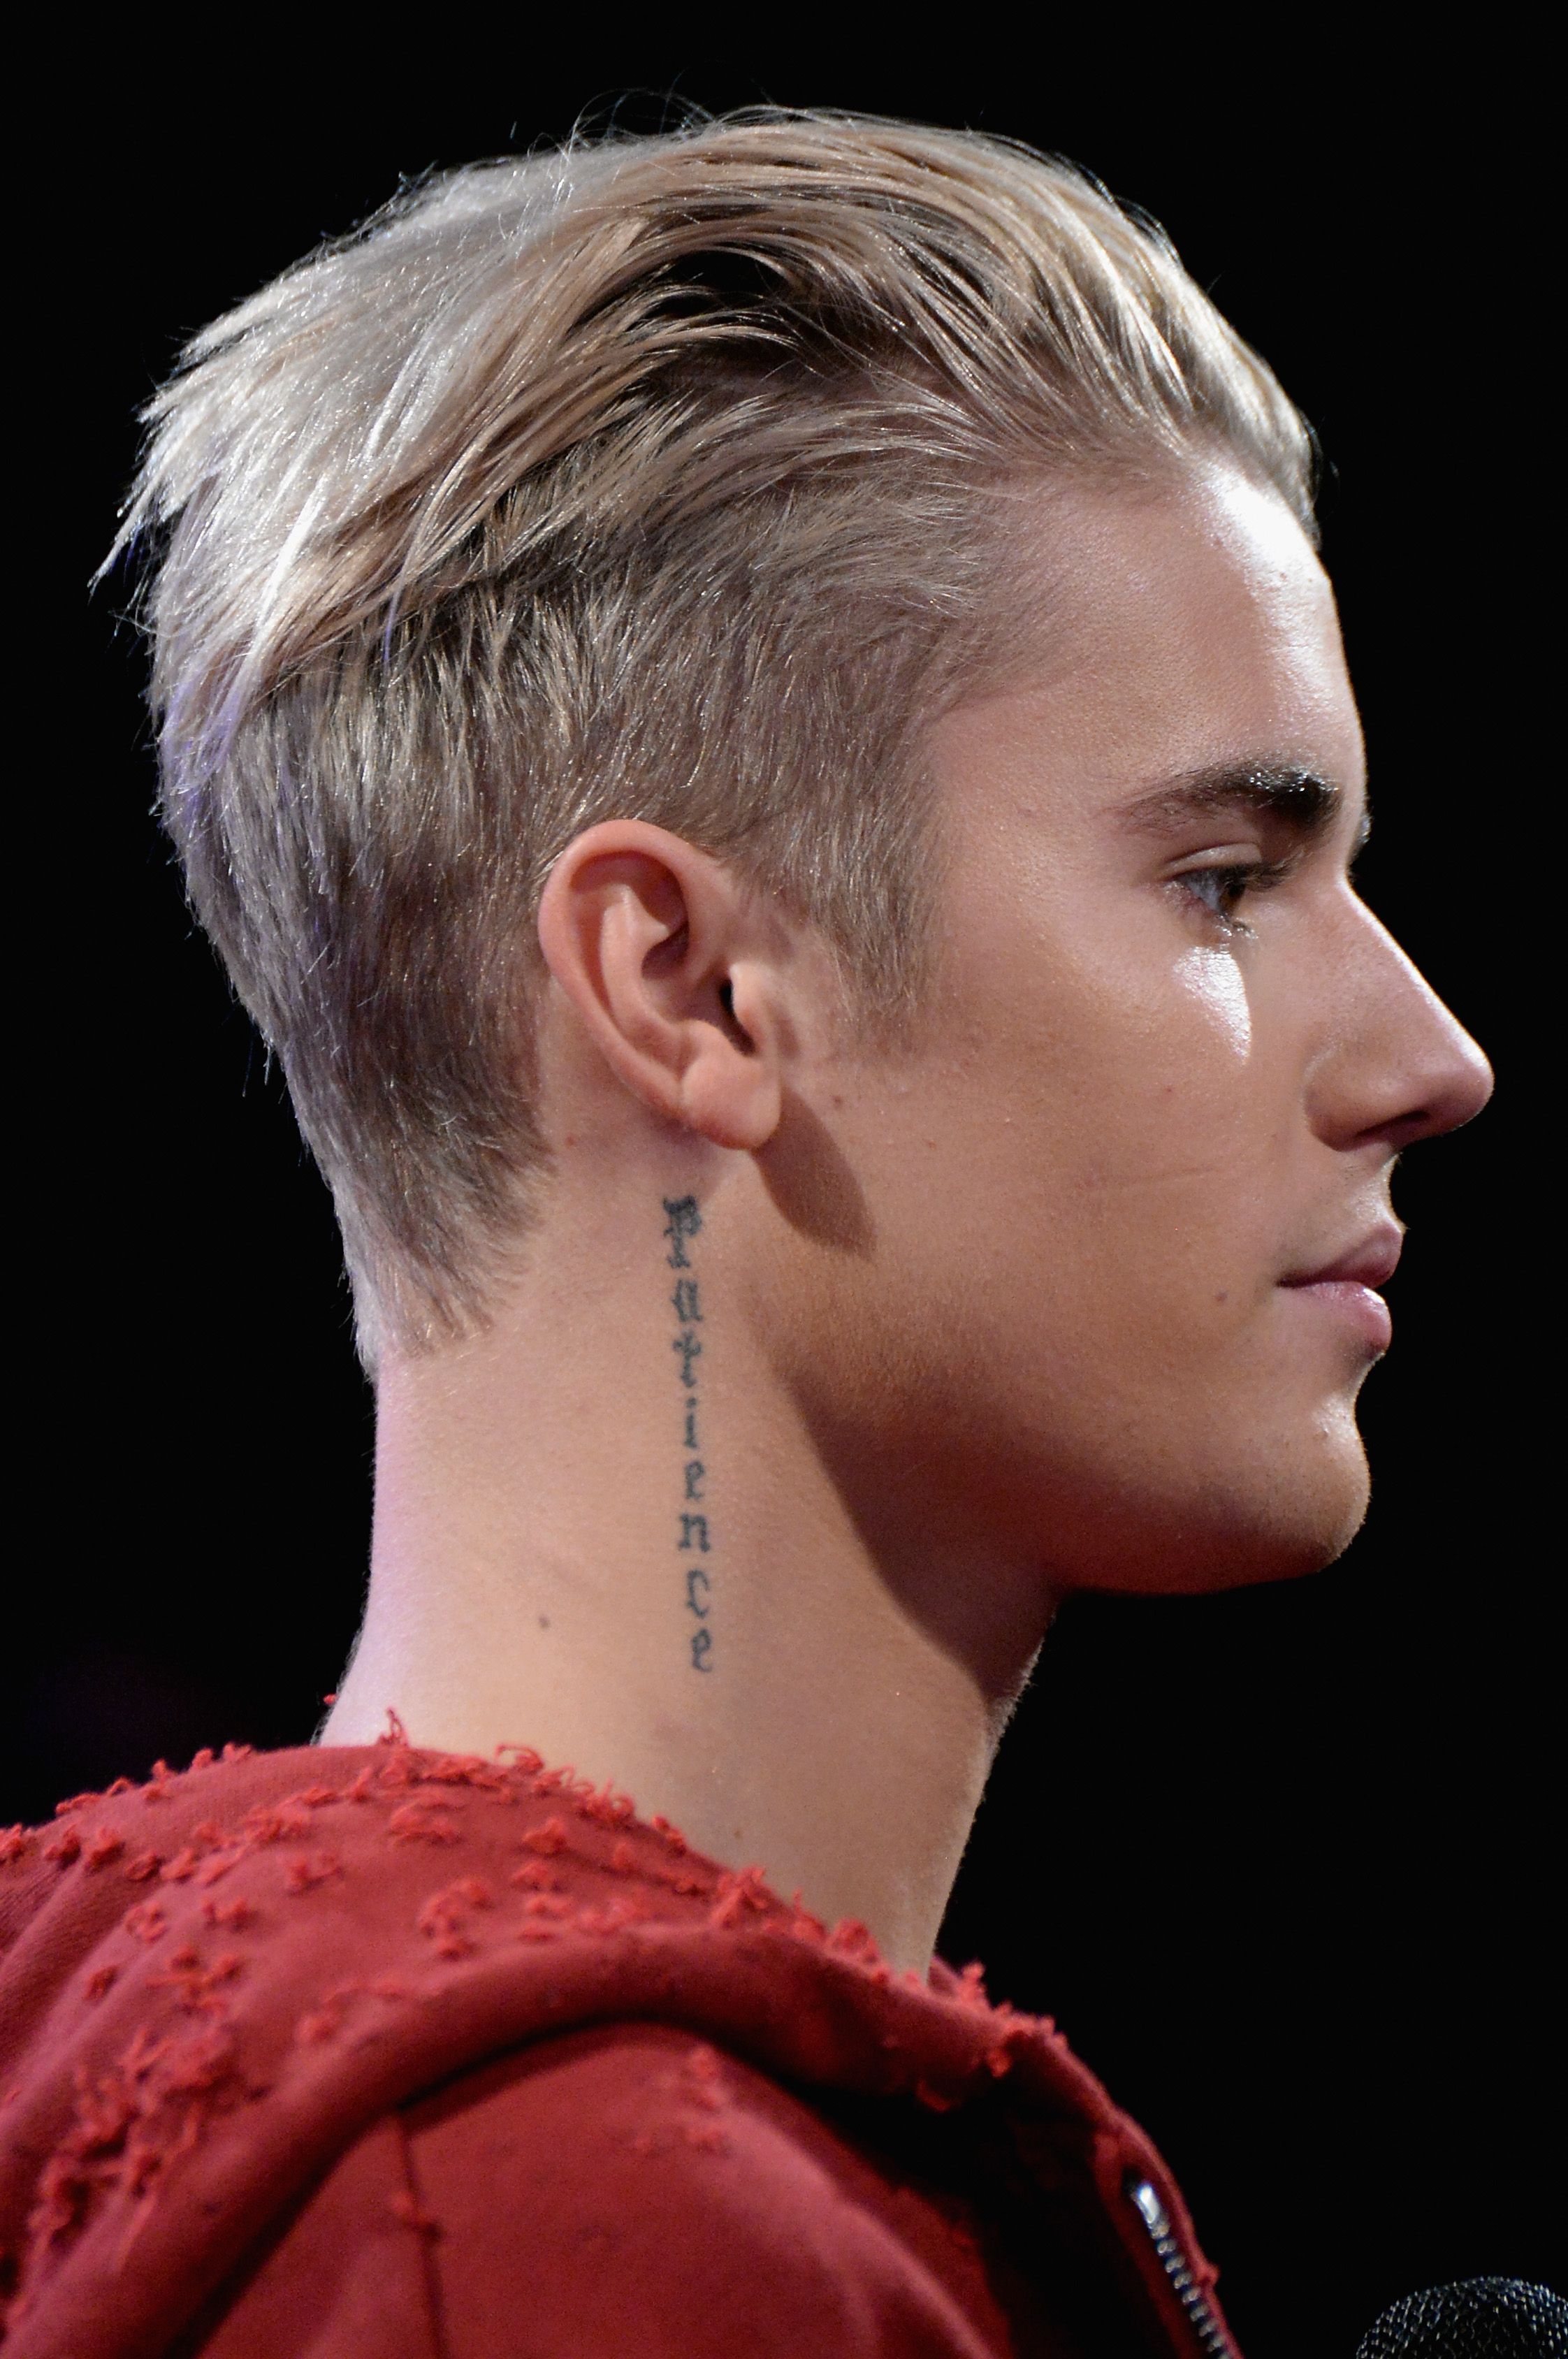 24 of Justin Bieber's tattoos explained in slightly creepy detail